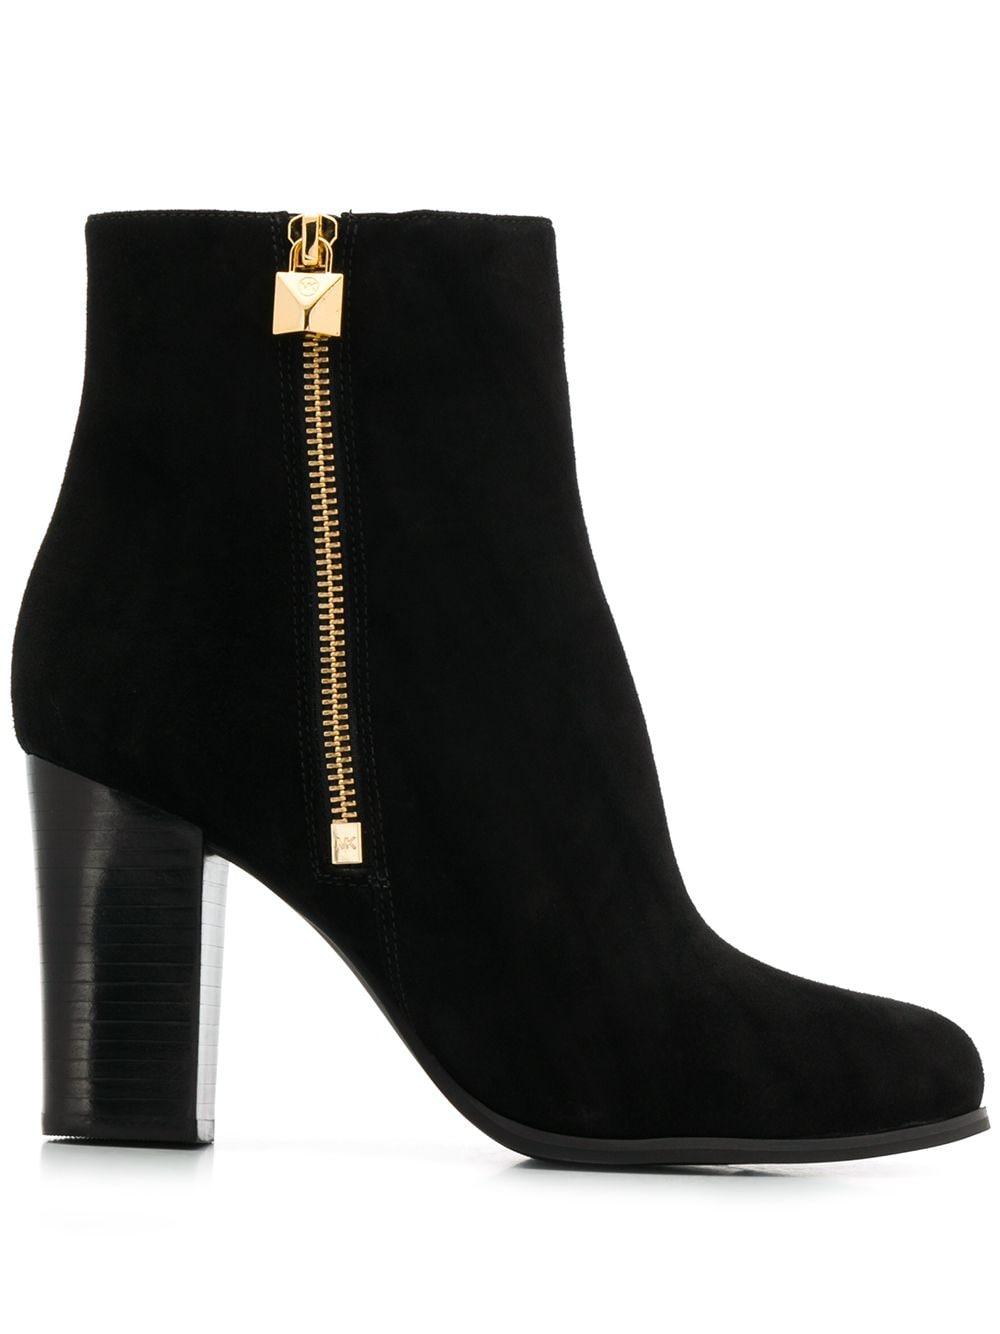 MICHAEL Michael Kors Leather High Heel Ankle Boots in Black - Save 23% ...